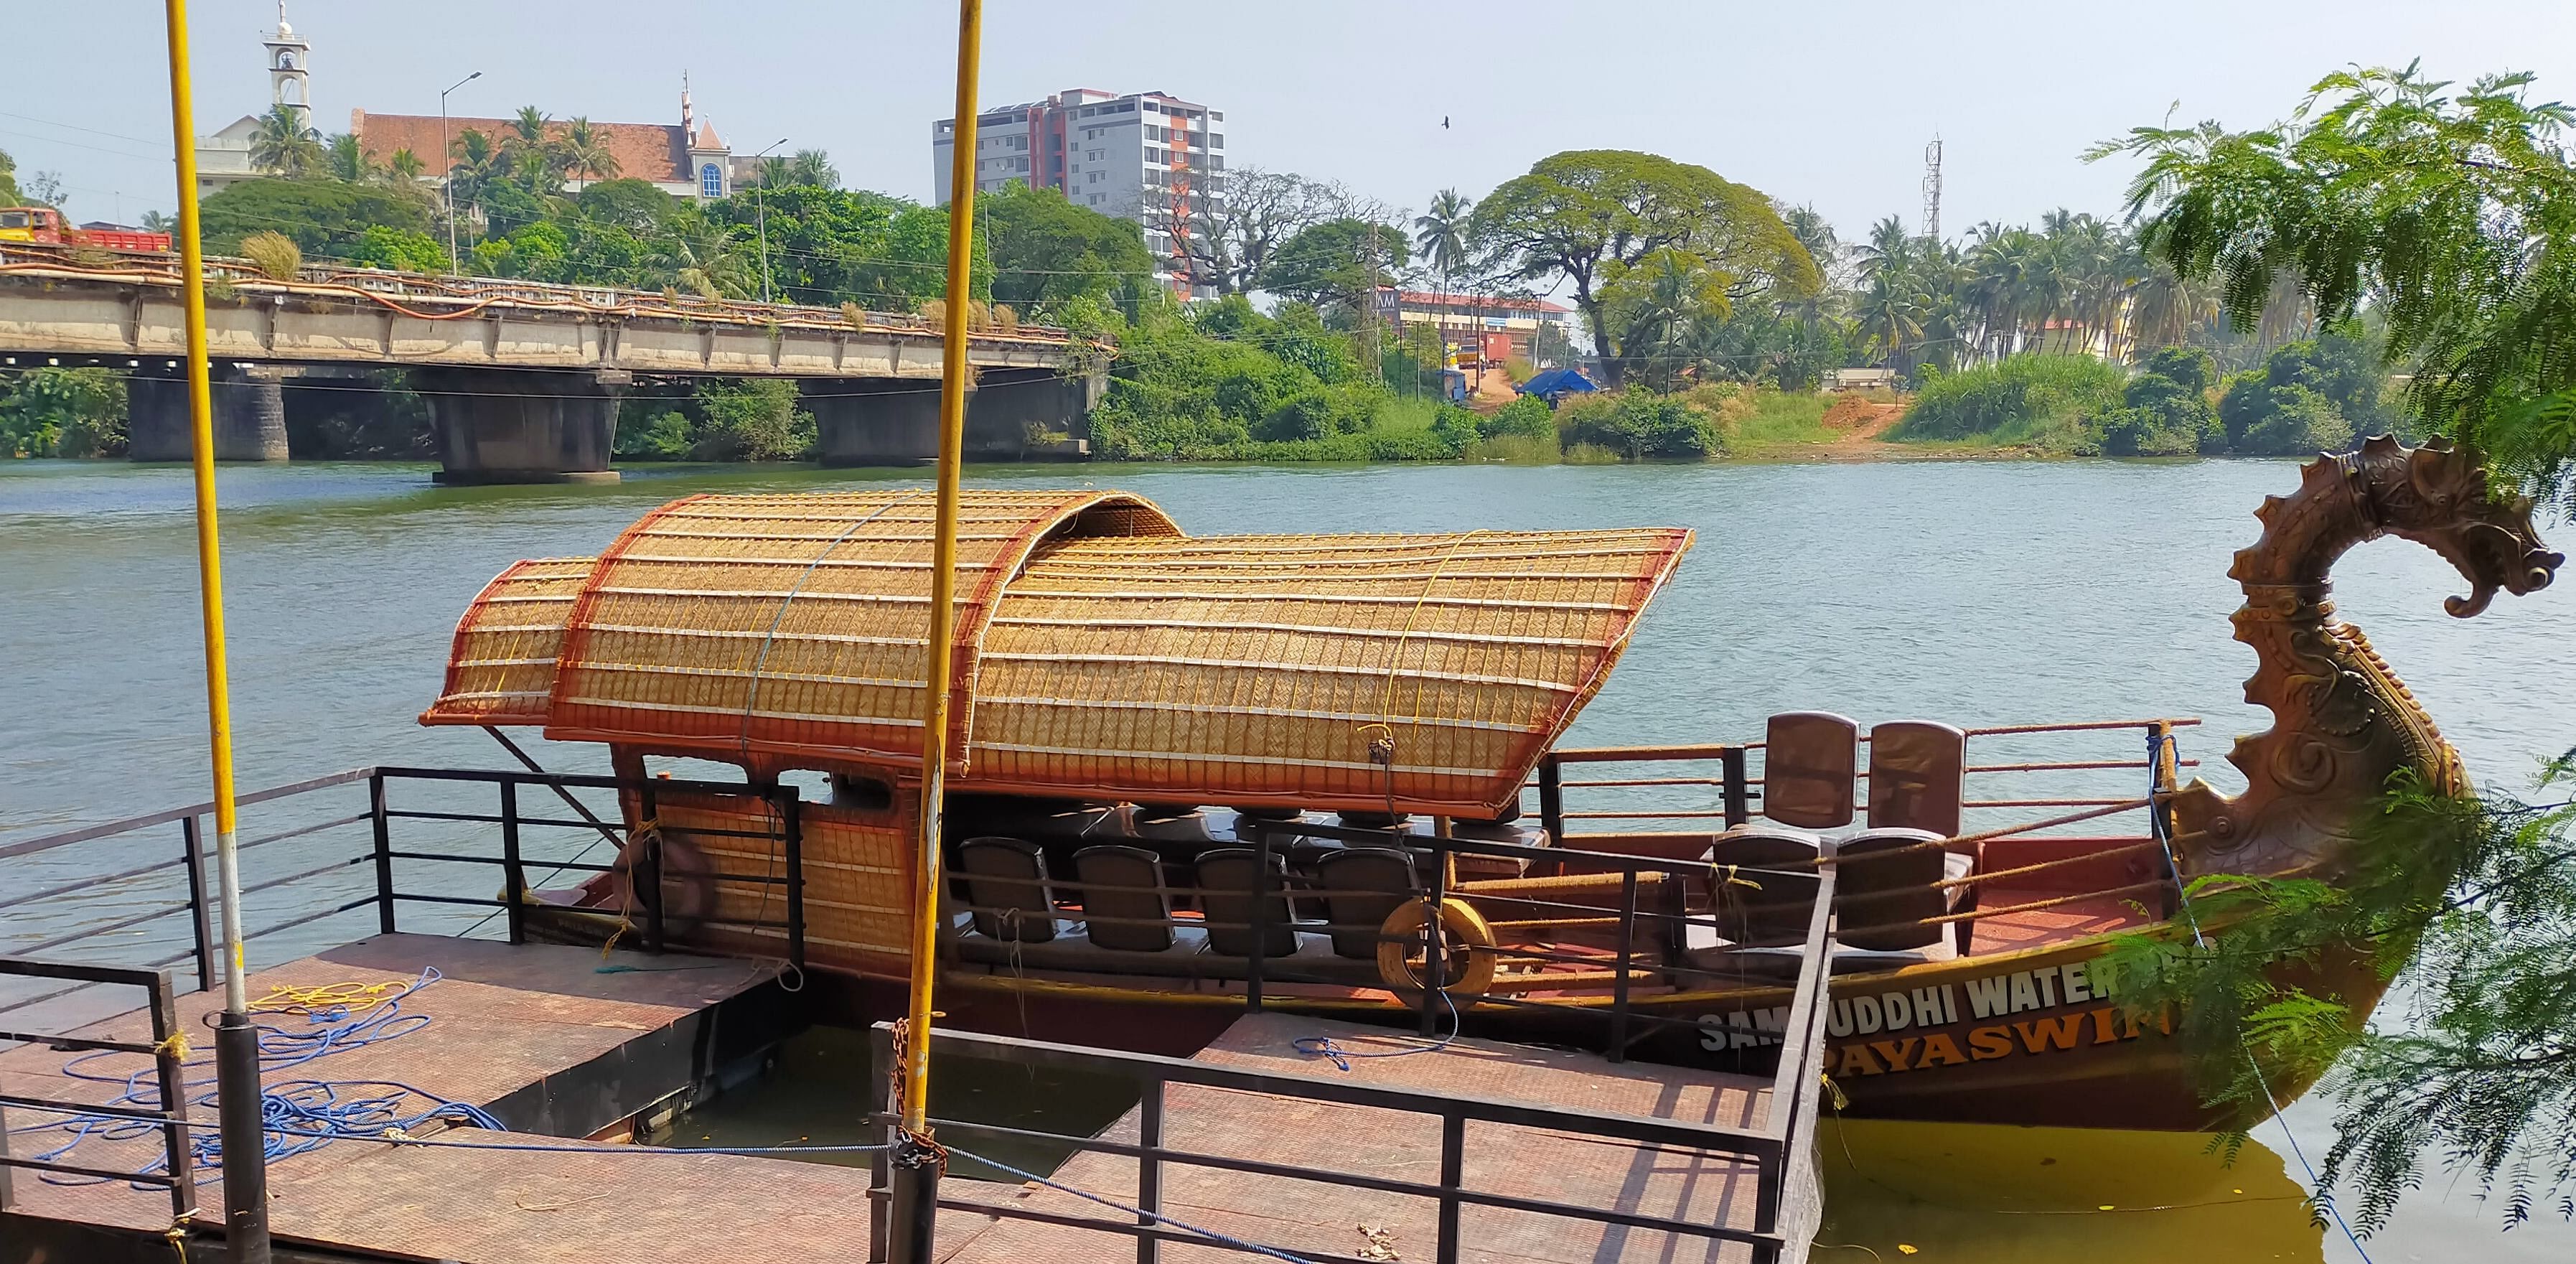 The Samruddhi Water Sports Club is set up by city-based Samruddhi Water Sports in association with the tourism department of Dakshina Kannada district. There will be cultural activities with emphasis on Tulu Nadu's culture and traditions to attract visitors, Credit: DH Photo